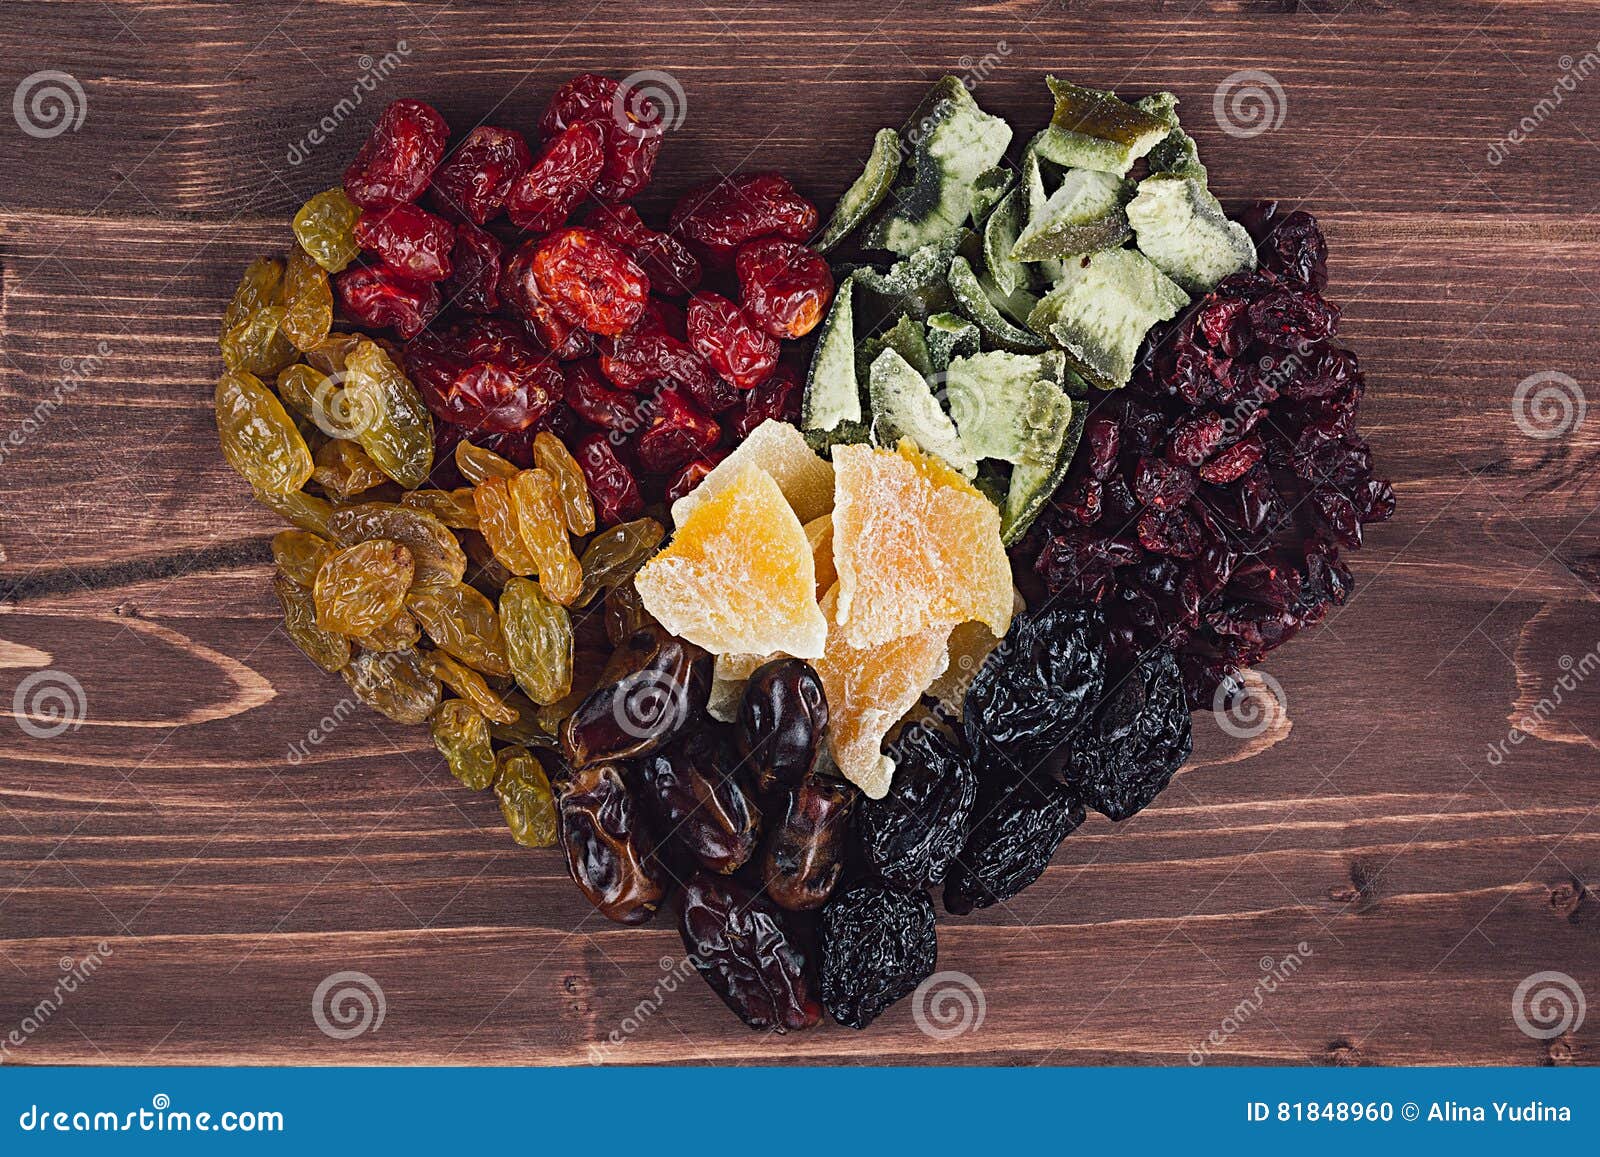 Heart of Dried Fruits Closeup on Brown Wooden Background. Decorative ...